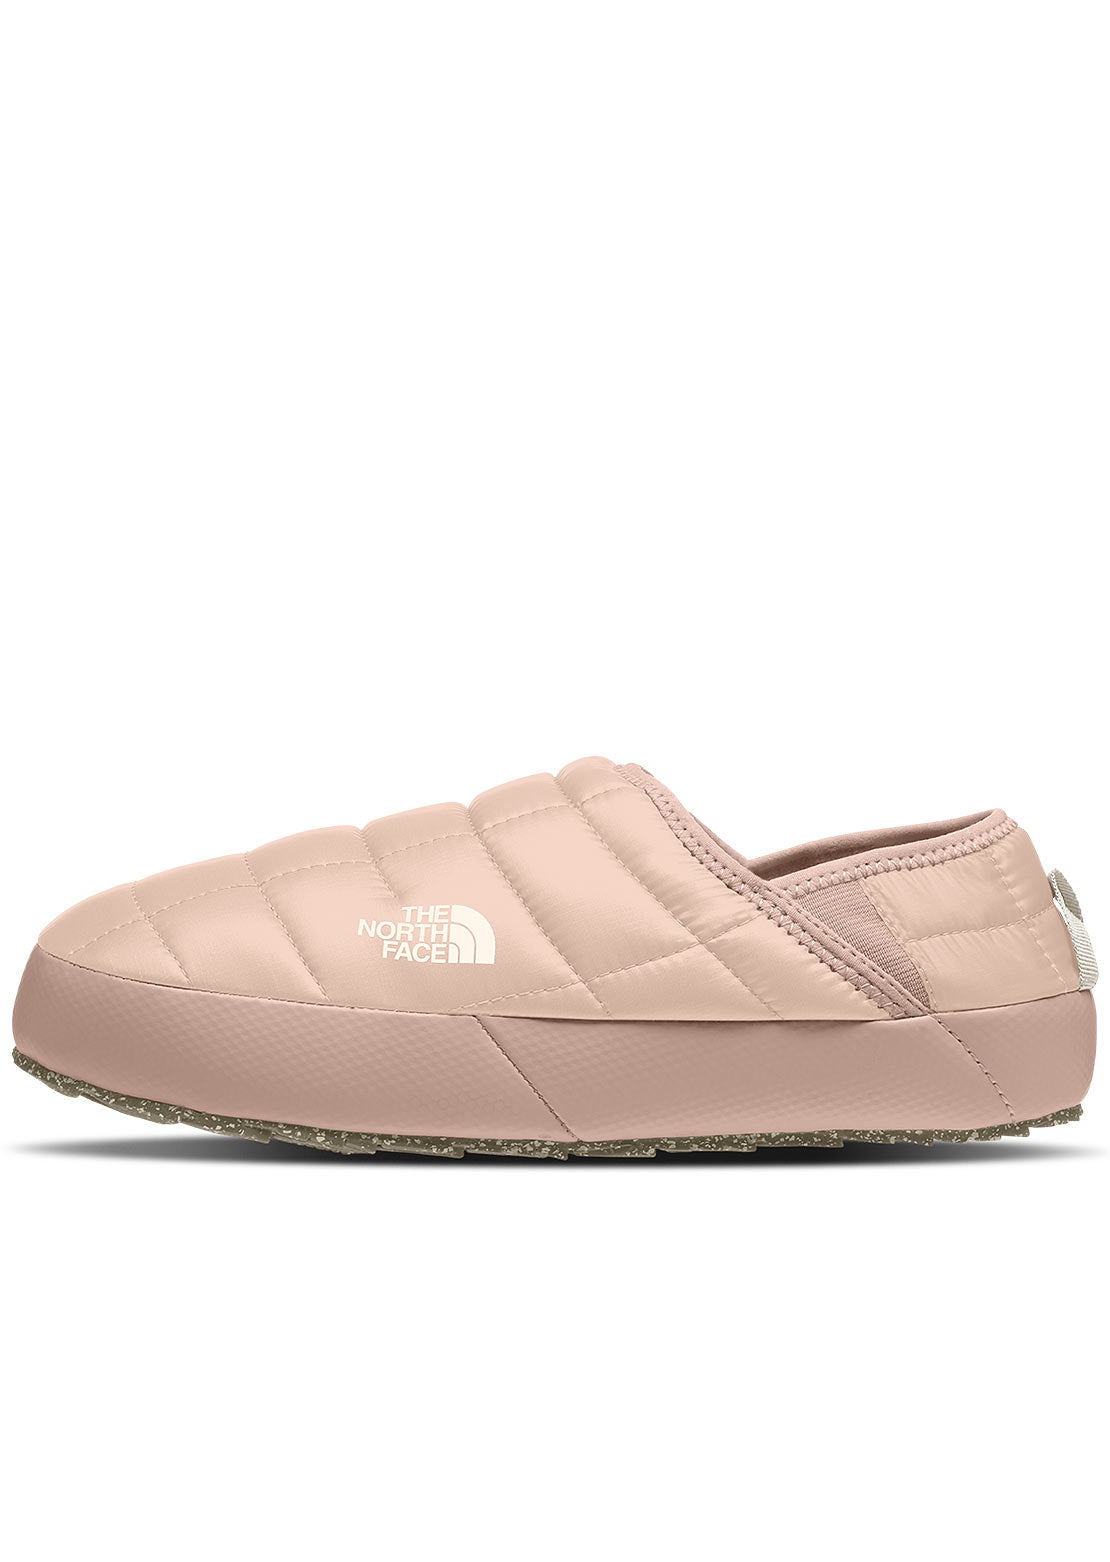 Gucci x The North Face Slippers Beige Wool - 679923 DEB70 - US